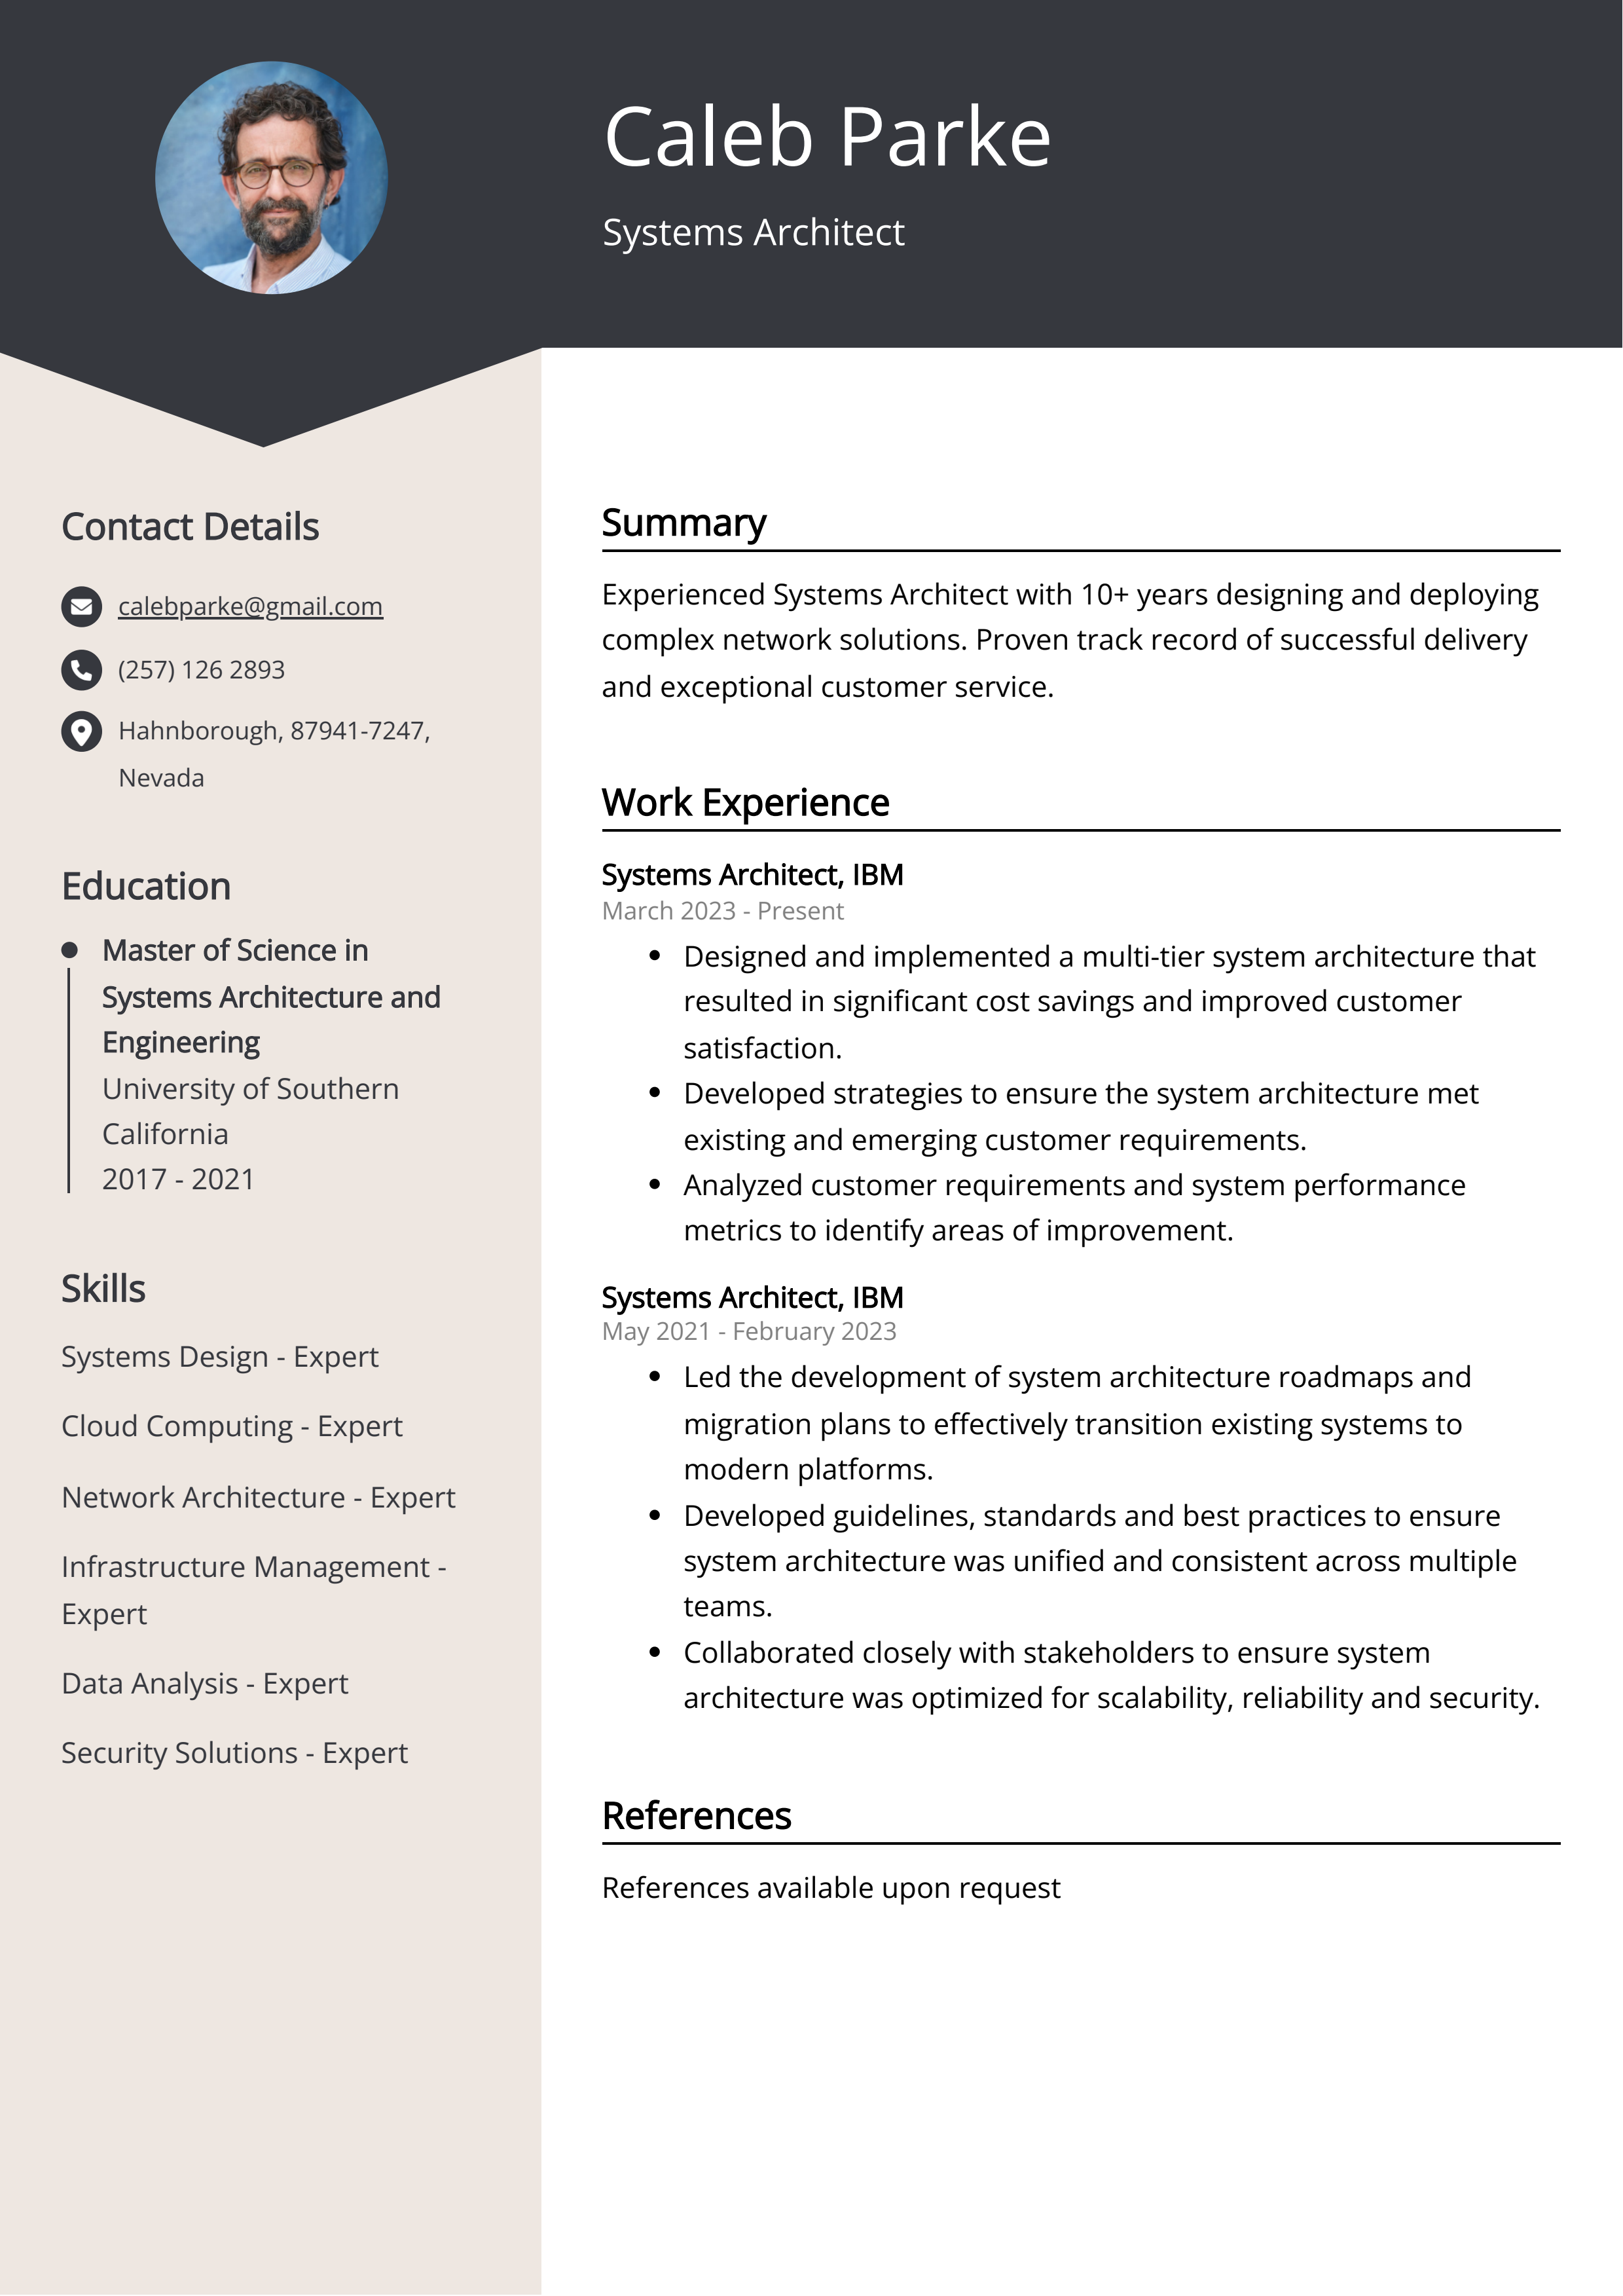 Systems Architect CV Example